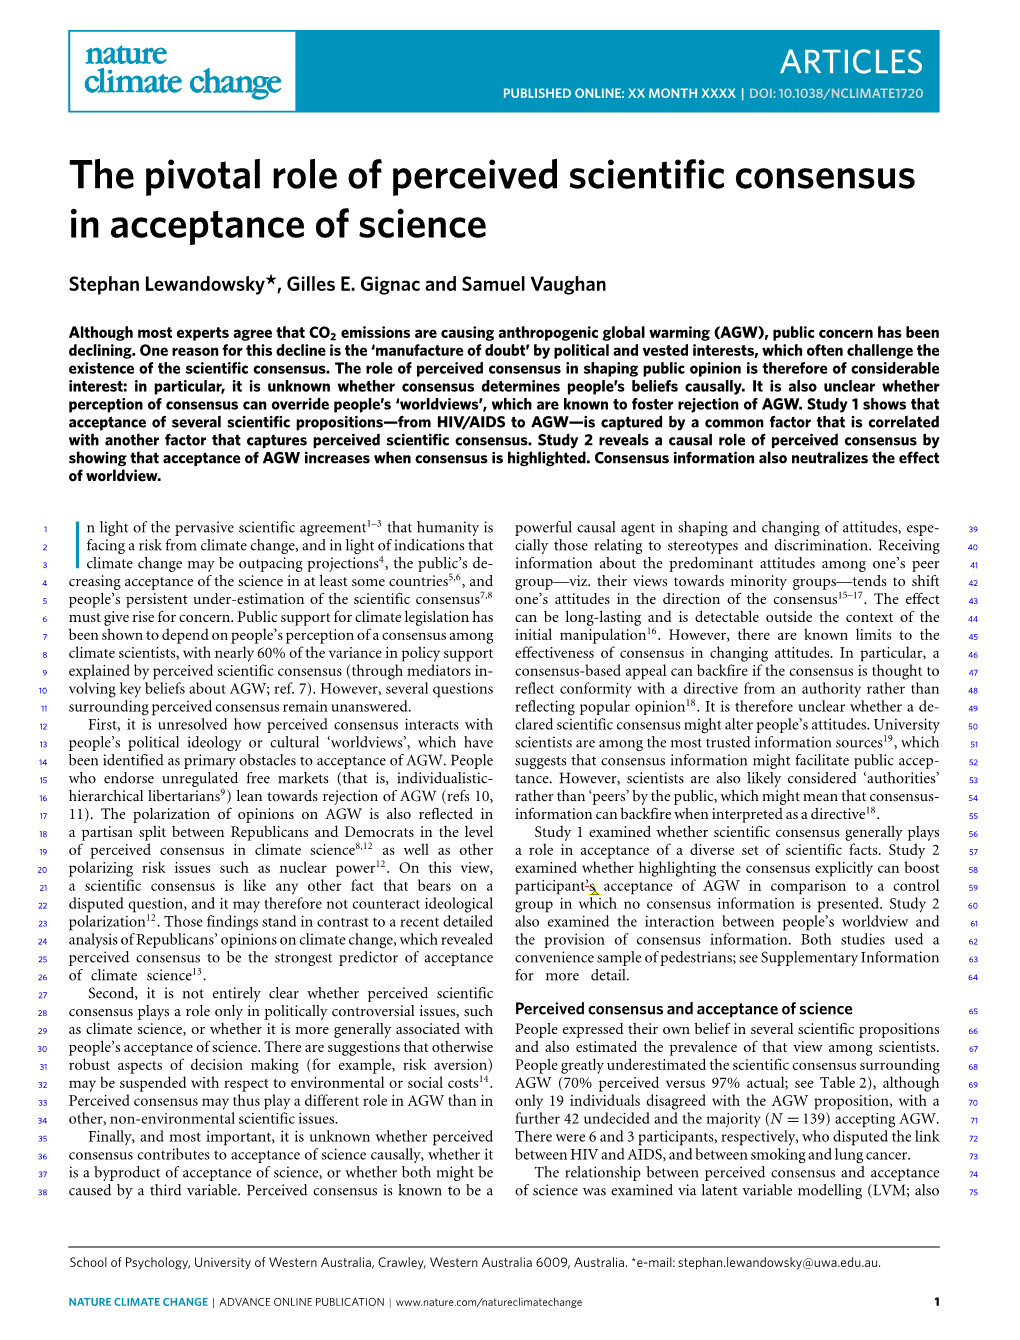 The Pivotal Role of Perceived Scientific Consensus in Acceptance of Science